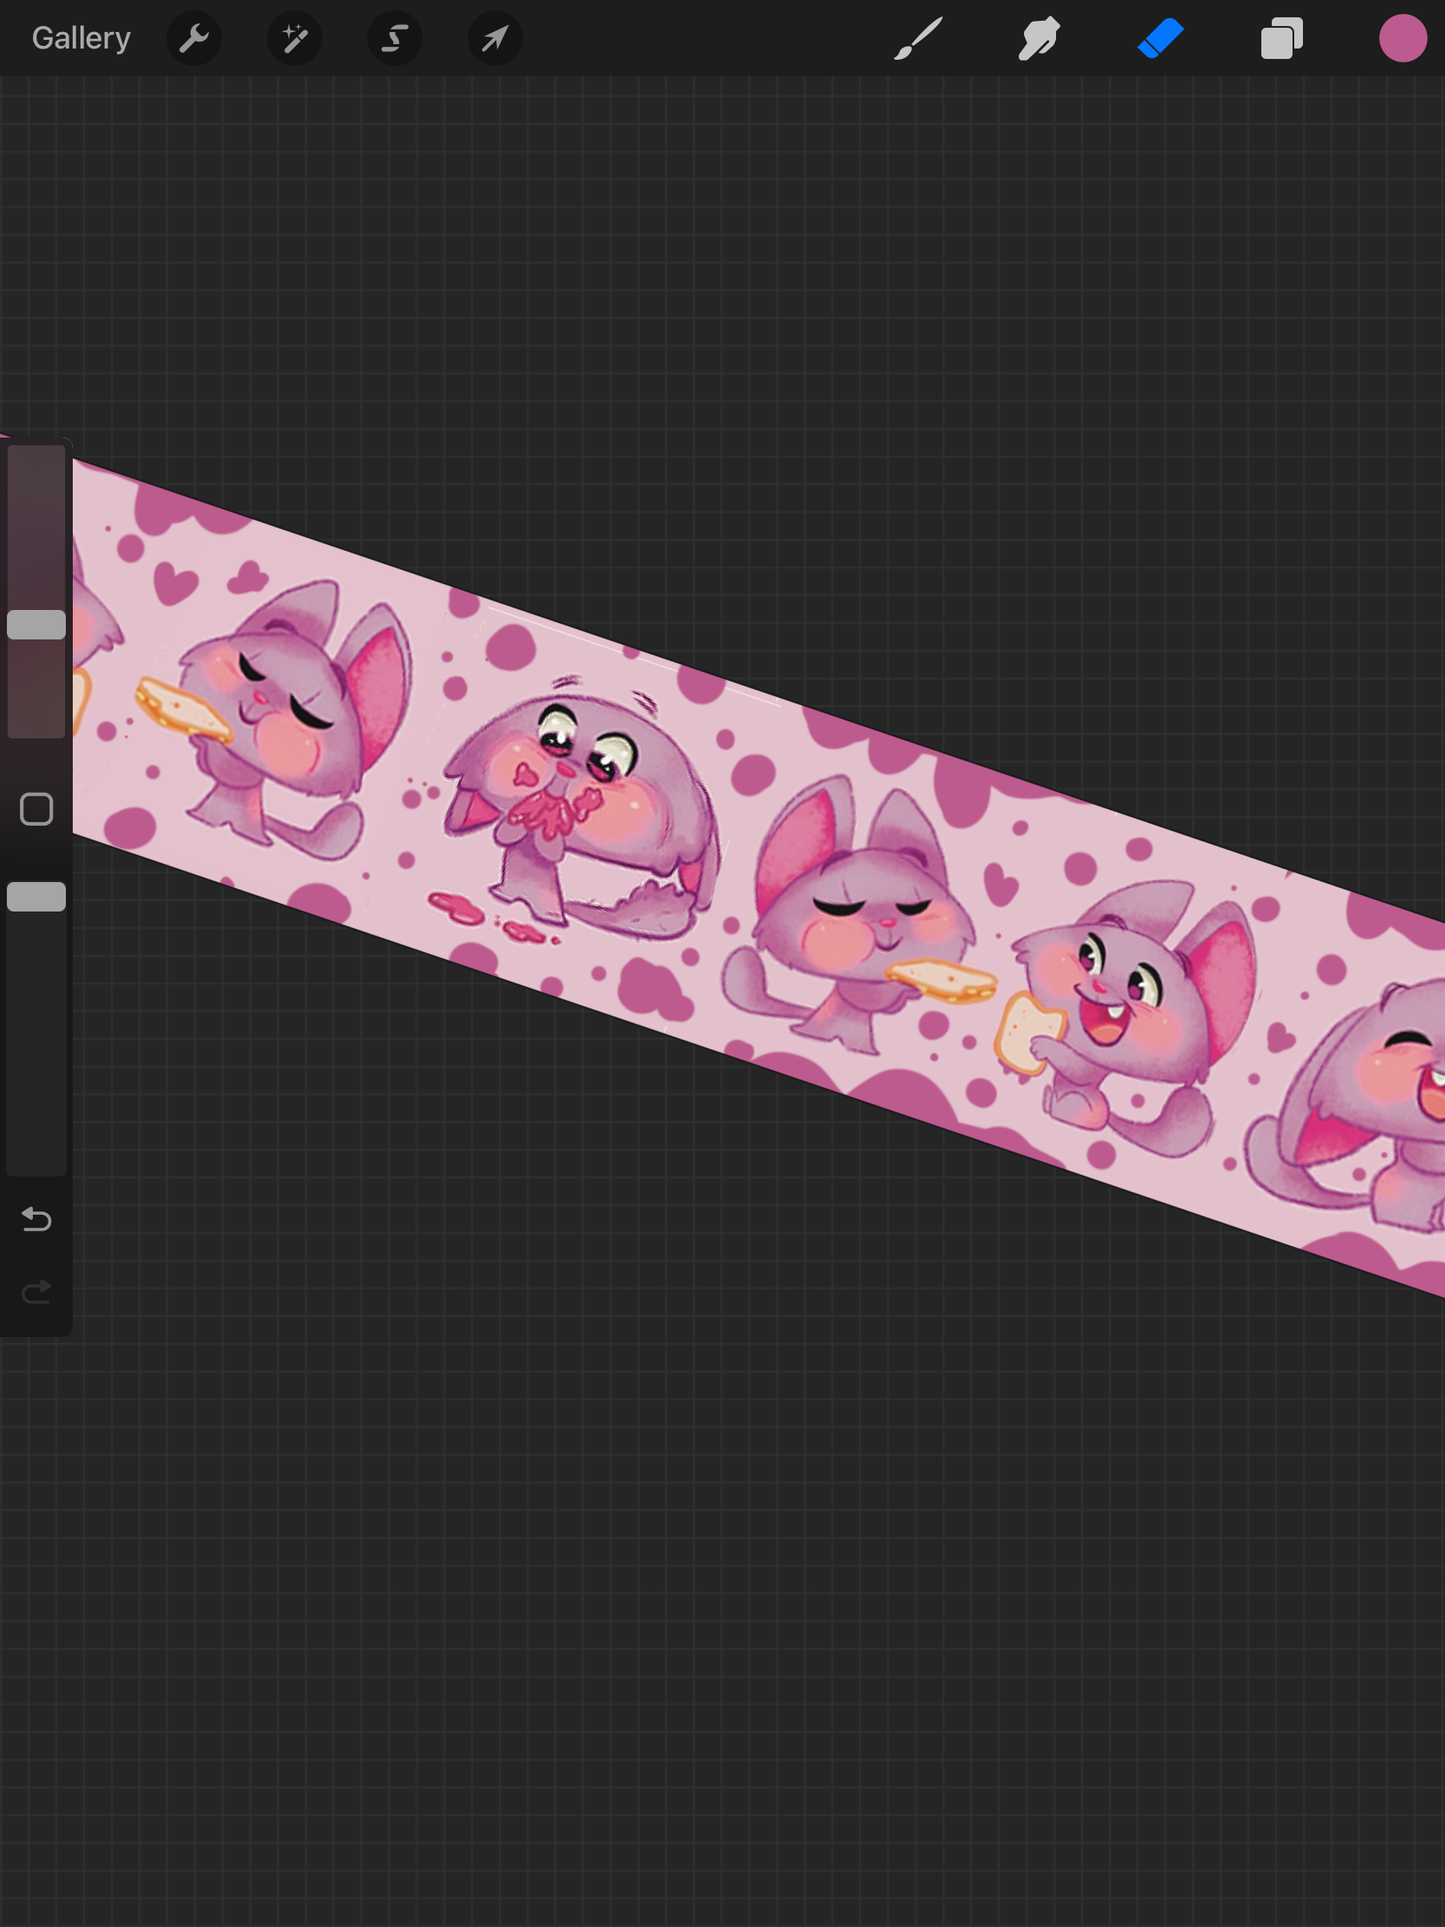 Washi Tape Pre-Order; Ships in August